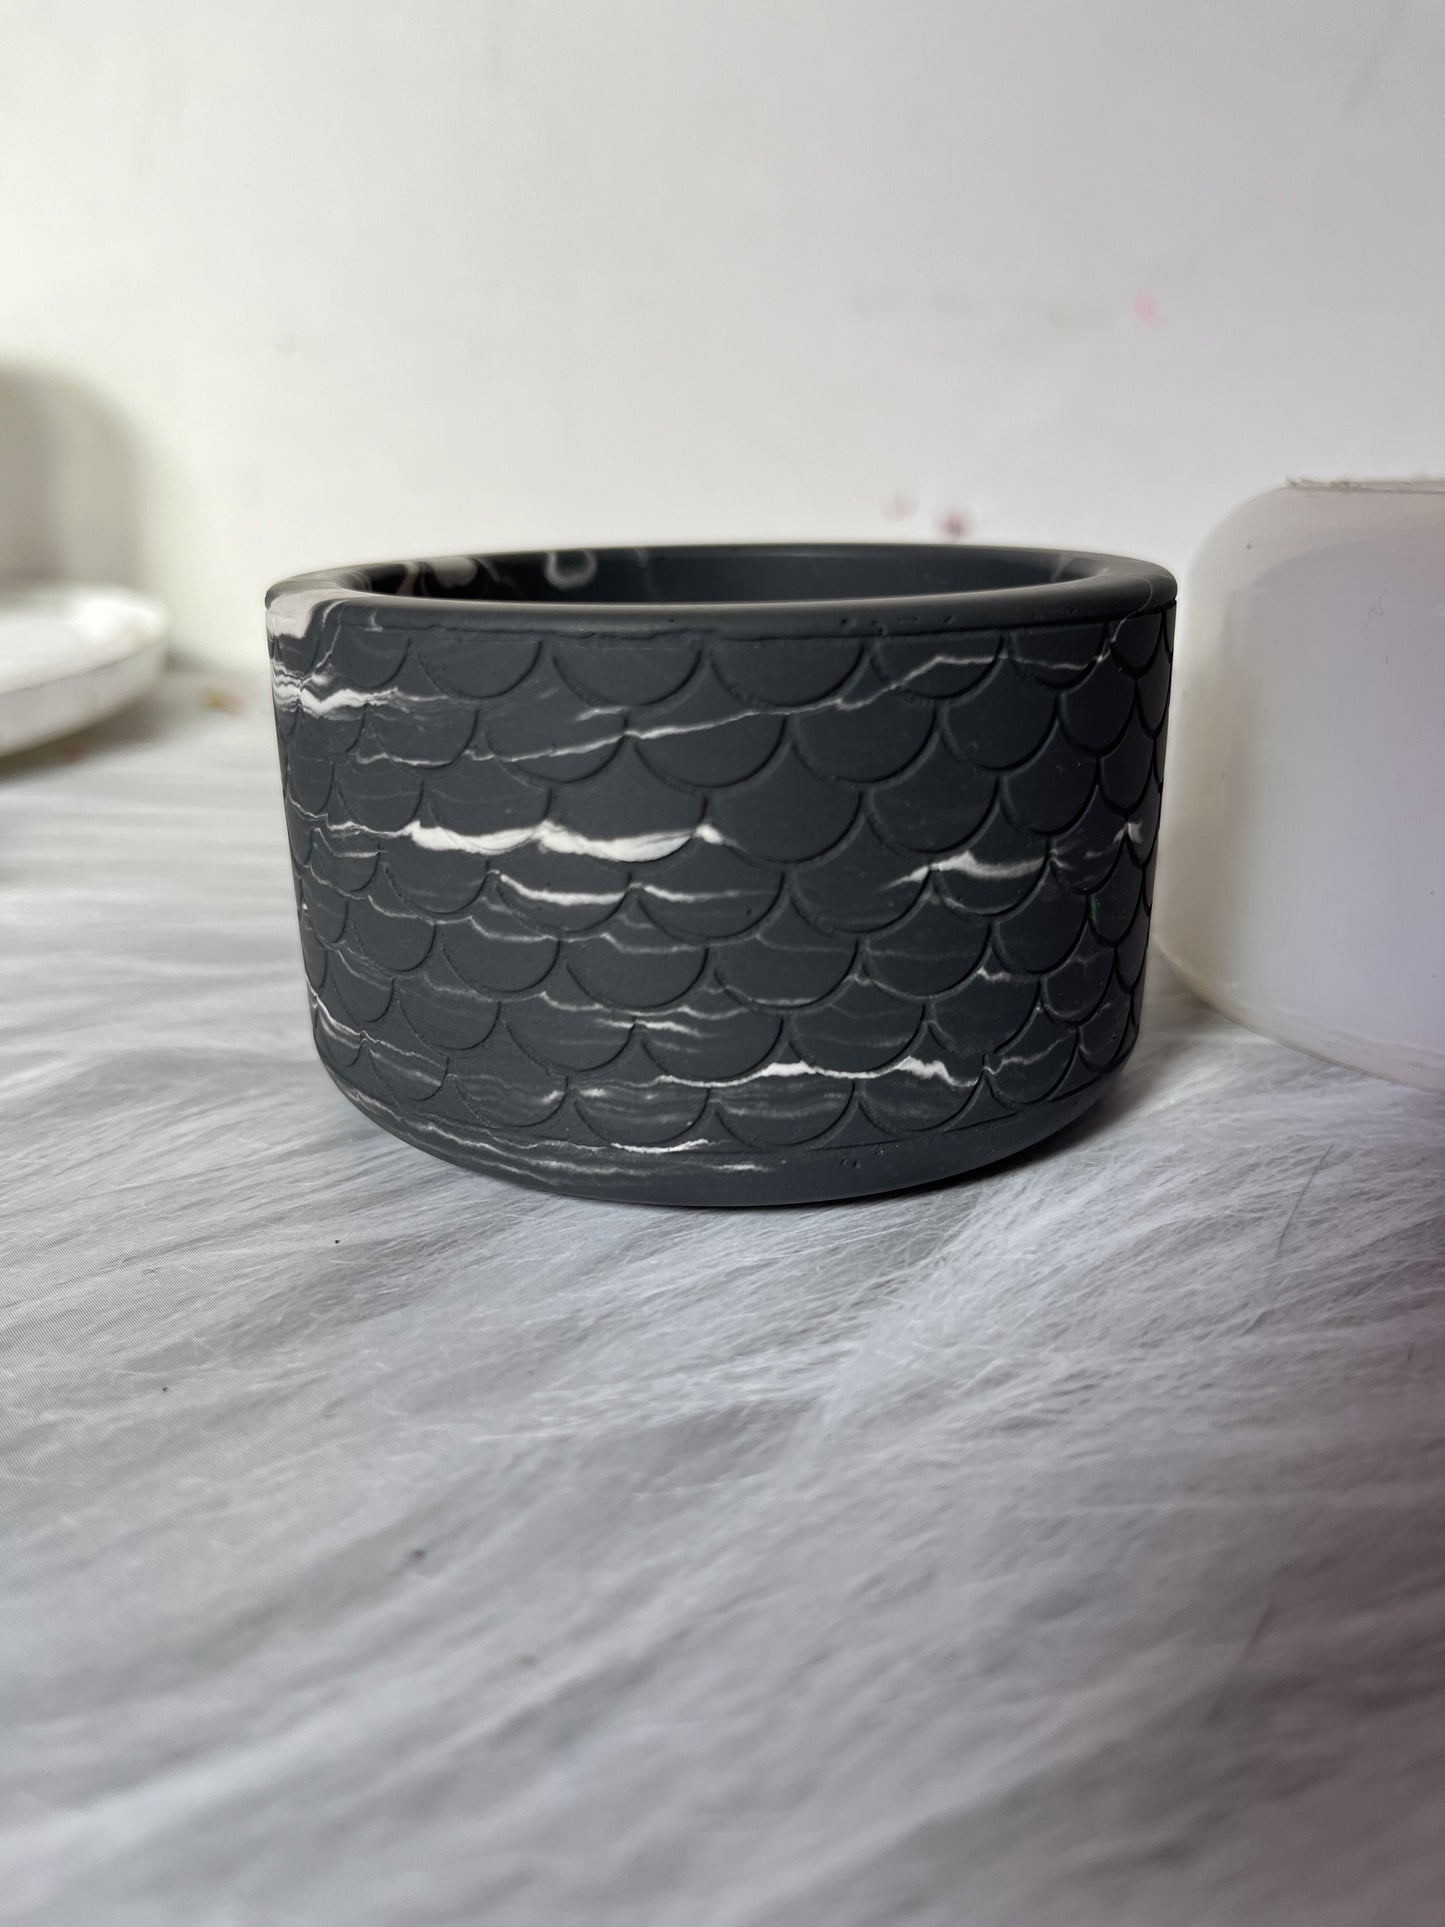 Wave Patterned Round Planter for Beyond MIX, Resin, Concrete